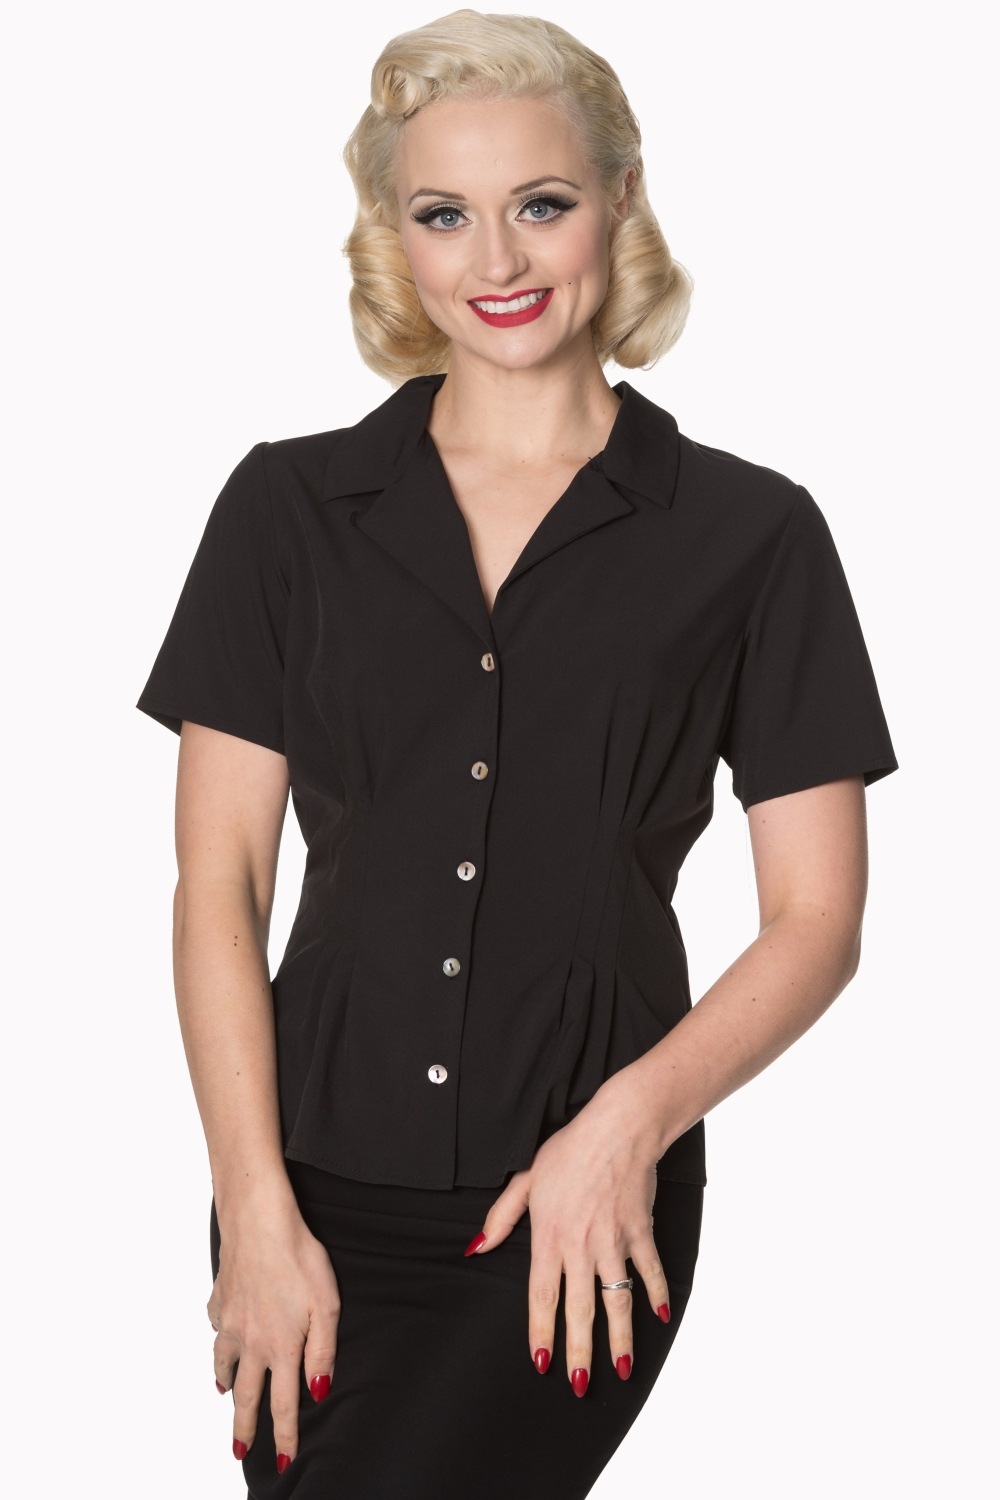 BNBL1274BLK_chemisier-blouse-pin-up-retro-50-s-rockabilly-classic-glamour